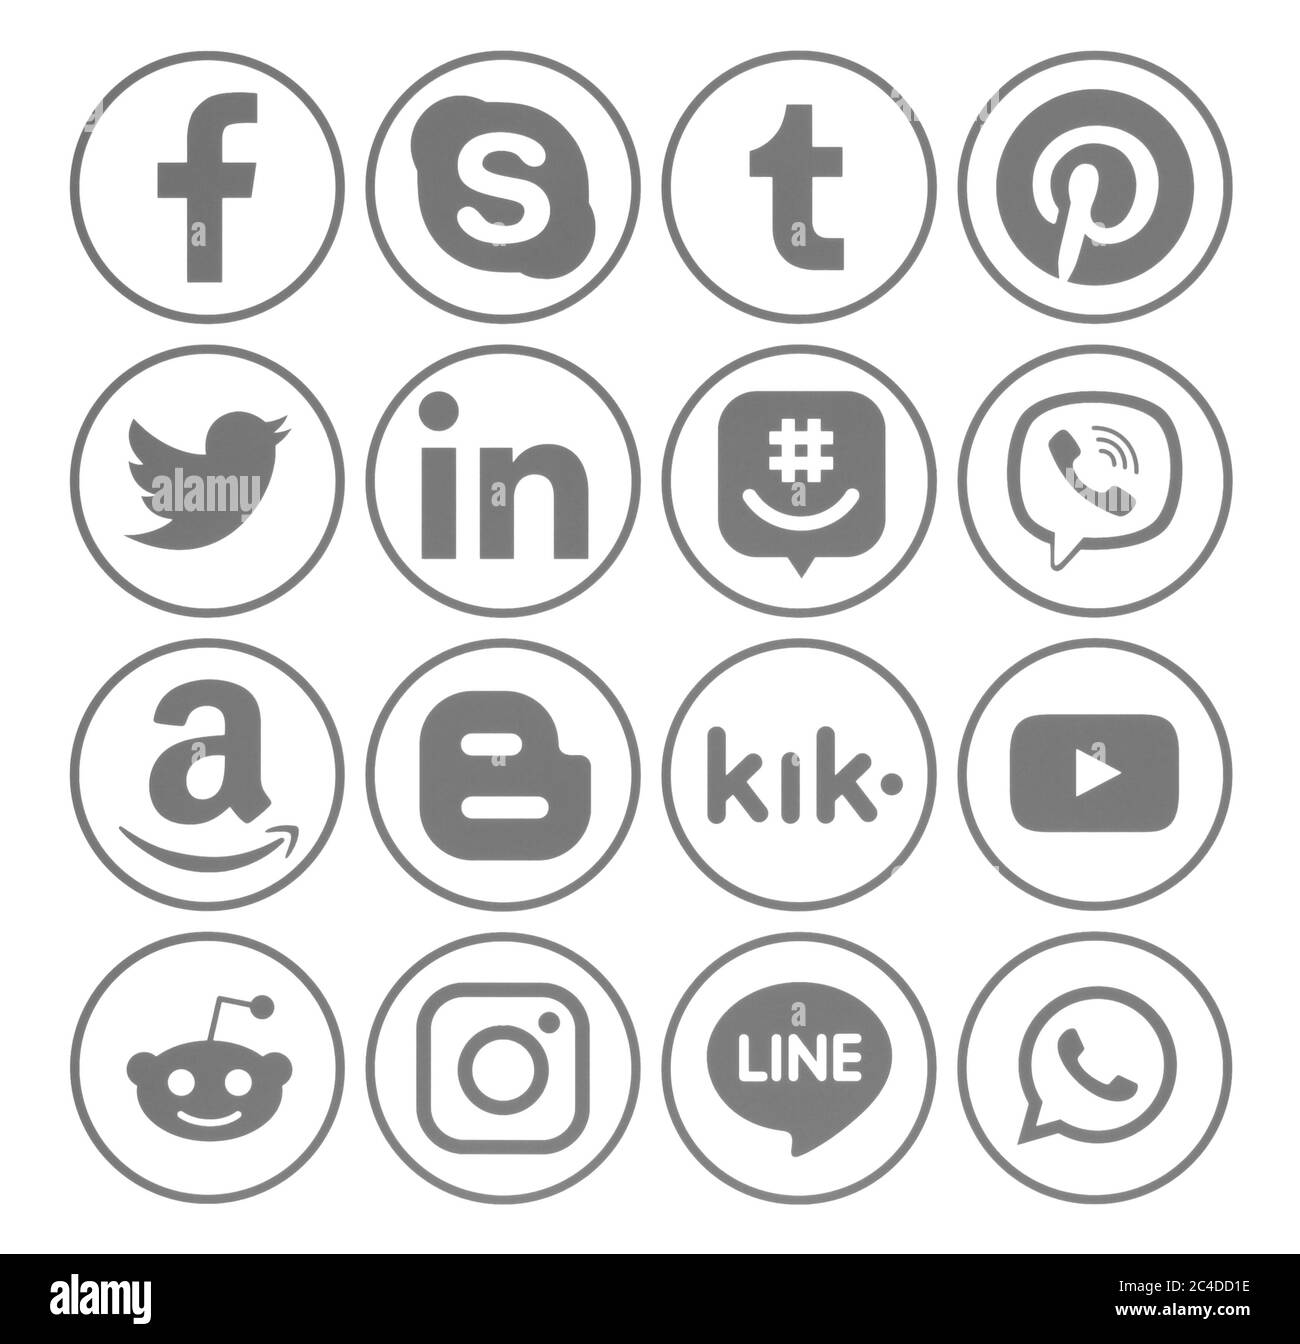 Kiev, Ukraine - November 02, 2019: Collection of popular round gray social media icons with rim, printed on white paper: Facebook, Twitter, Instagram, Stock Photo